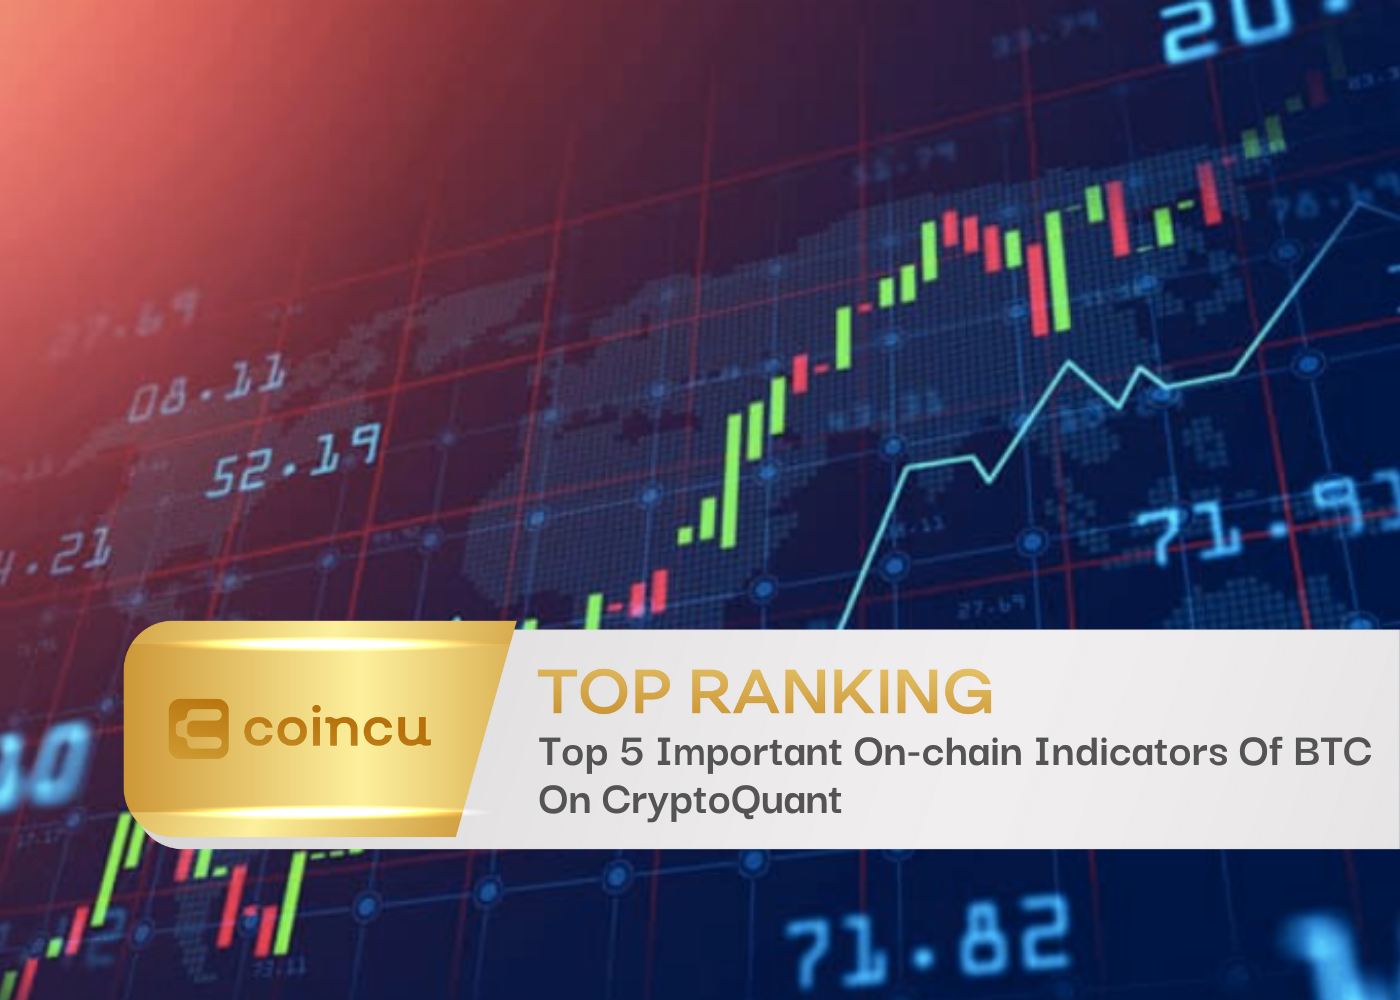 Top 5 Important On-chain Indicators Of BTC On CryptoQuant